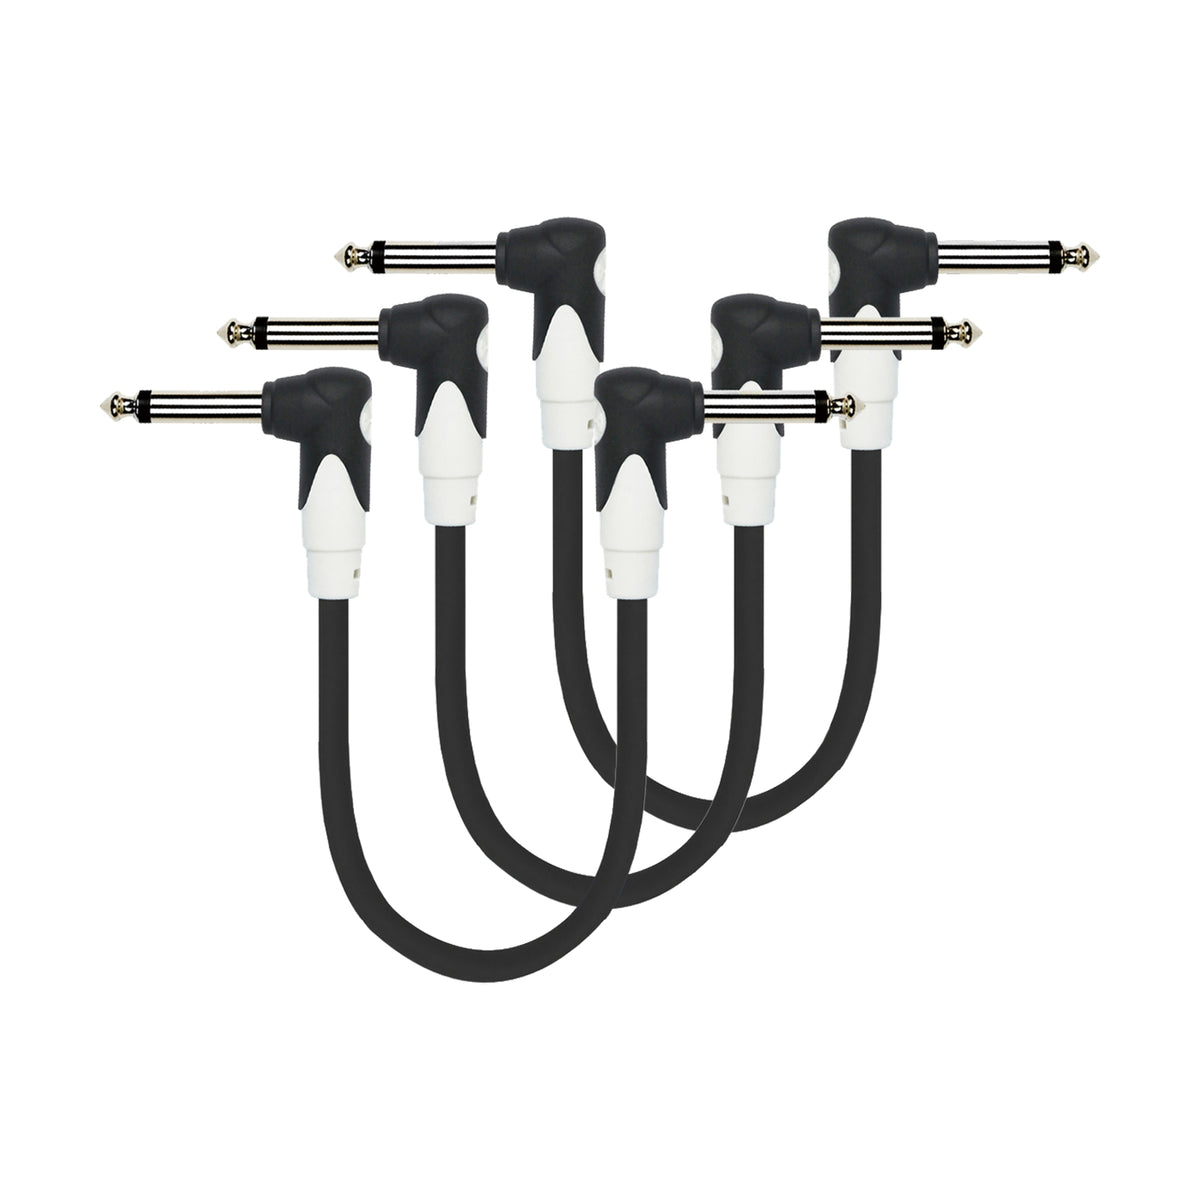 Kirlin Patch Cables 3 Inch Moulded Plugs 3-Pack